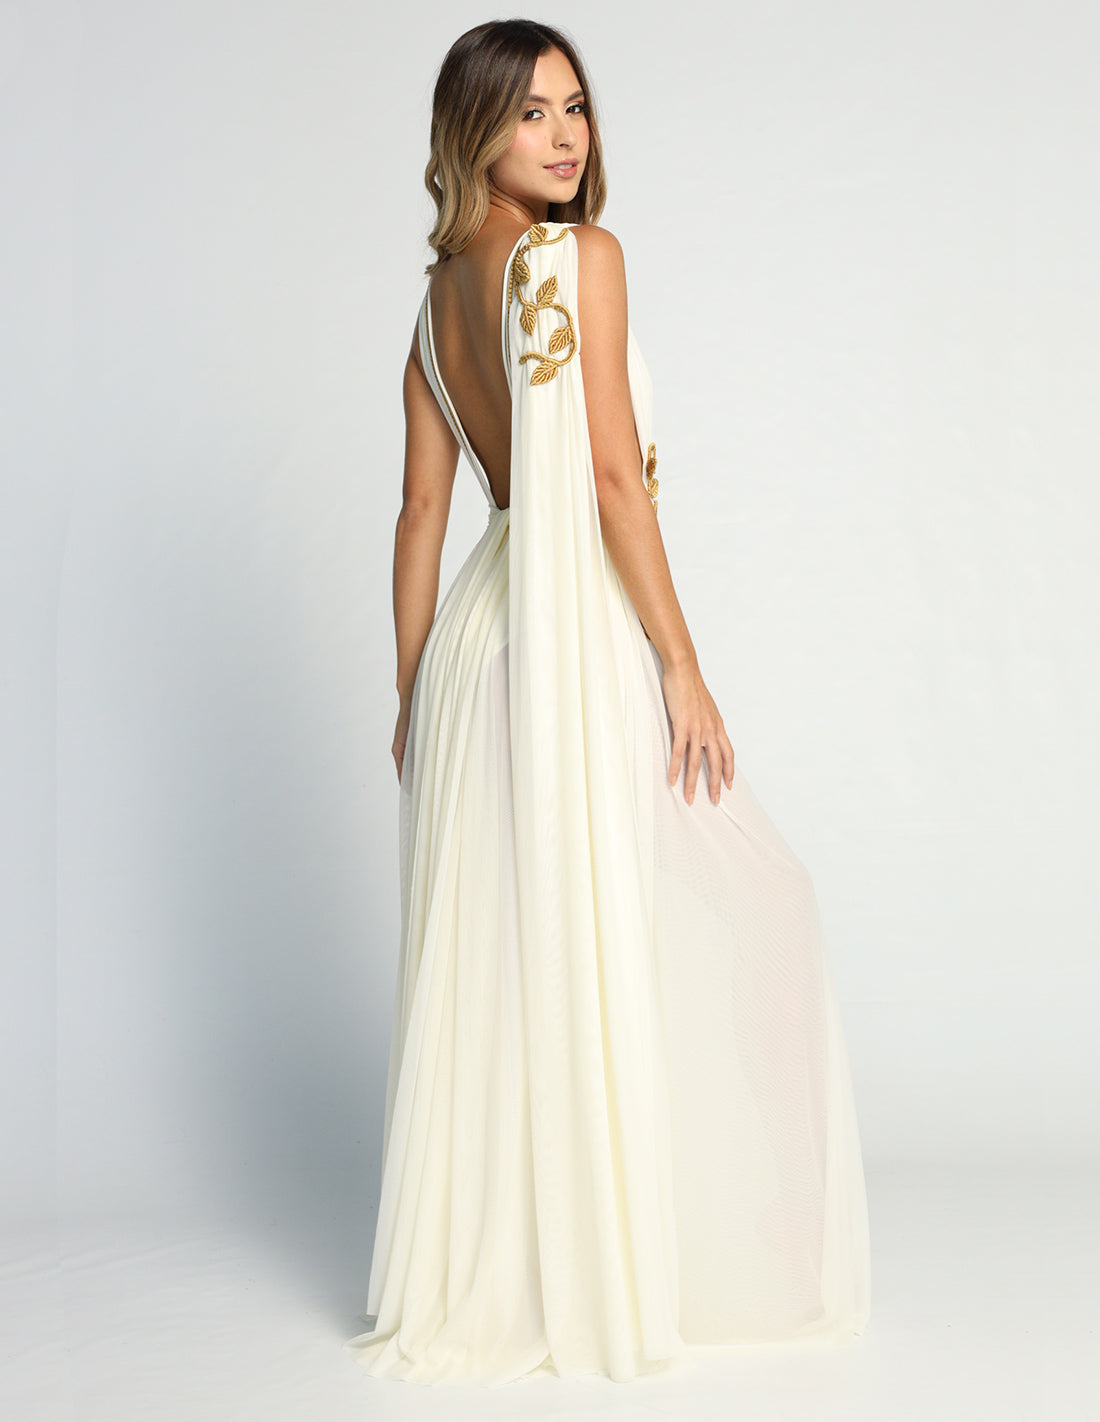 Copernico Dress Ivory + Gold. Hand-Dyed Dress With Hand Woven Macramé In Ivory + Gold. Entreaguas